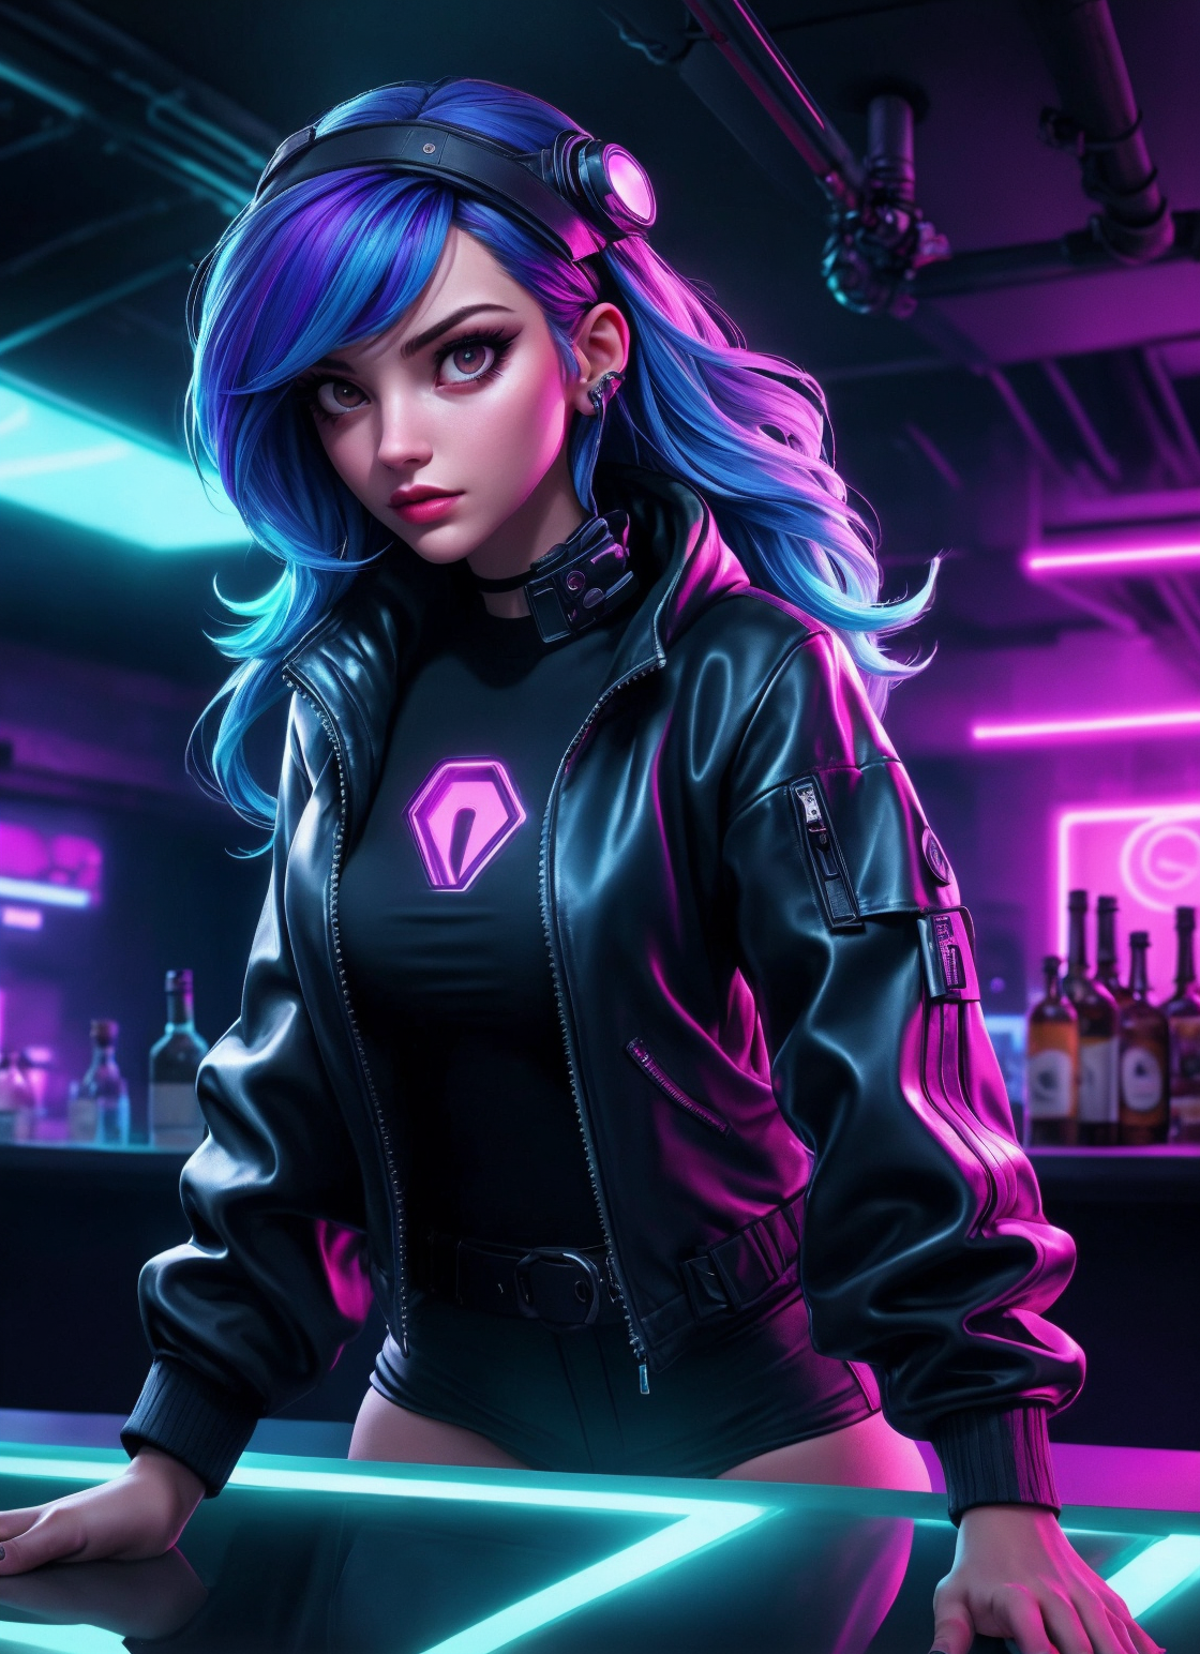 A cartoon image of a woman wearing a black leather jacket, with her hand on her hip and a purple hairstyle. She has a pink light in the background and is standing in front of a bar with several bottles visible.